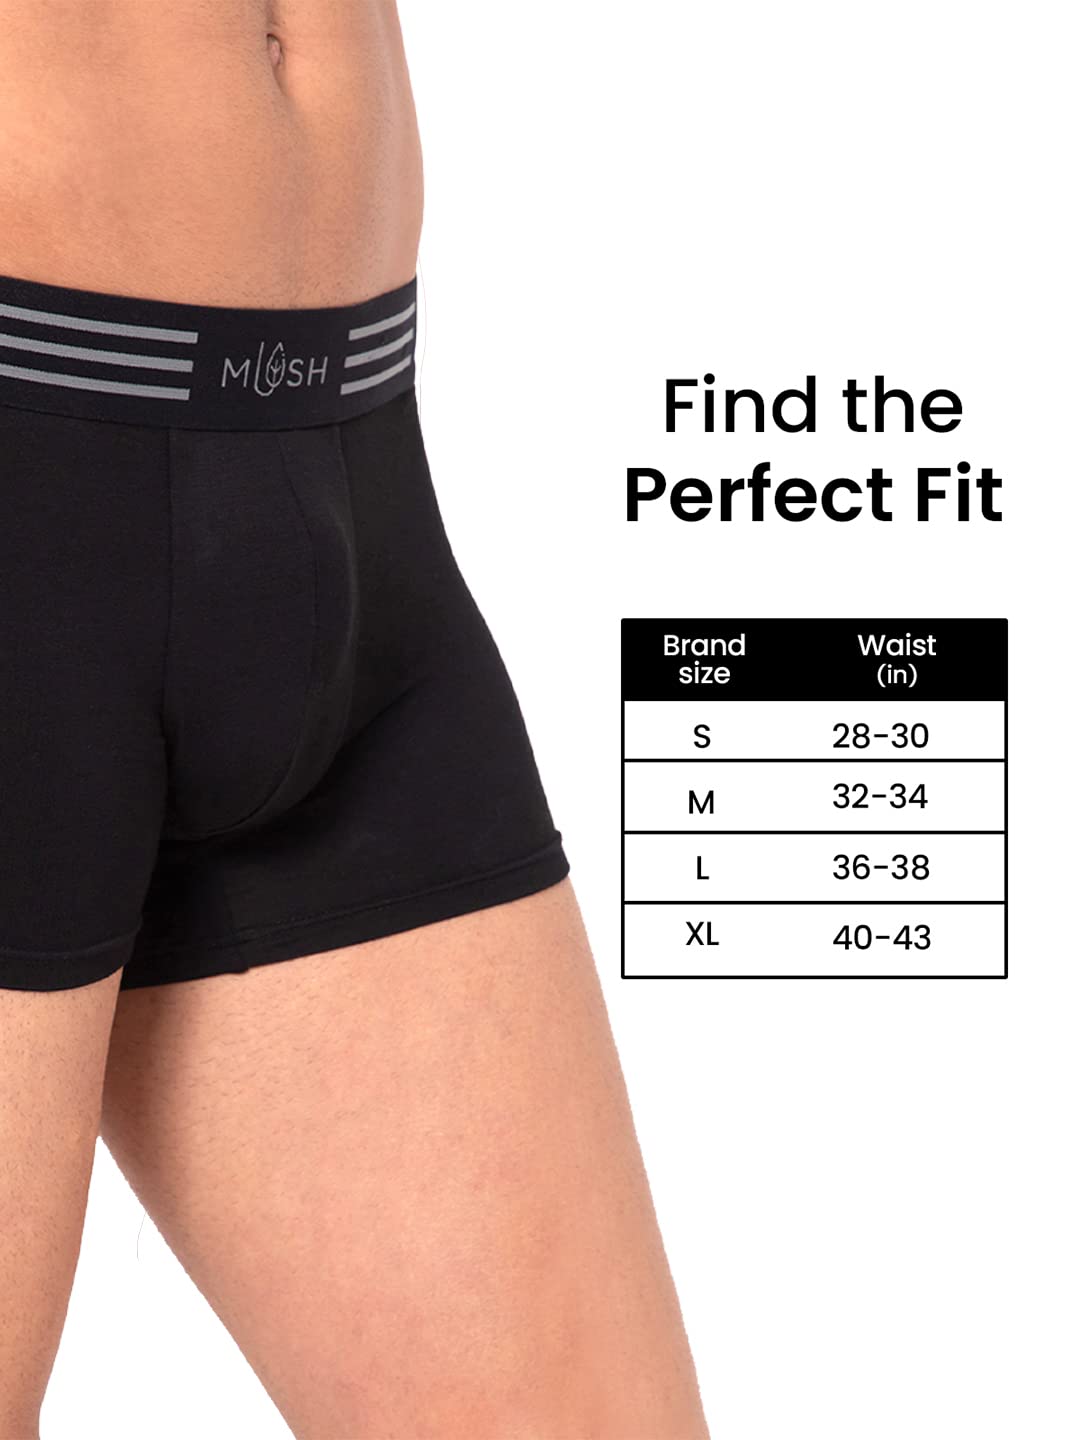 Mush Ultra Soft, Breathable, Feather Light Men's Bamboo Trunk || Naturally Anti-Odor and Anti-Microbial Bamboo Innerwear Pack of 2 (XL, Melange Grey and Black)